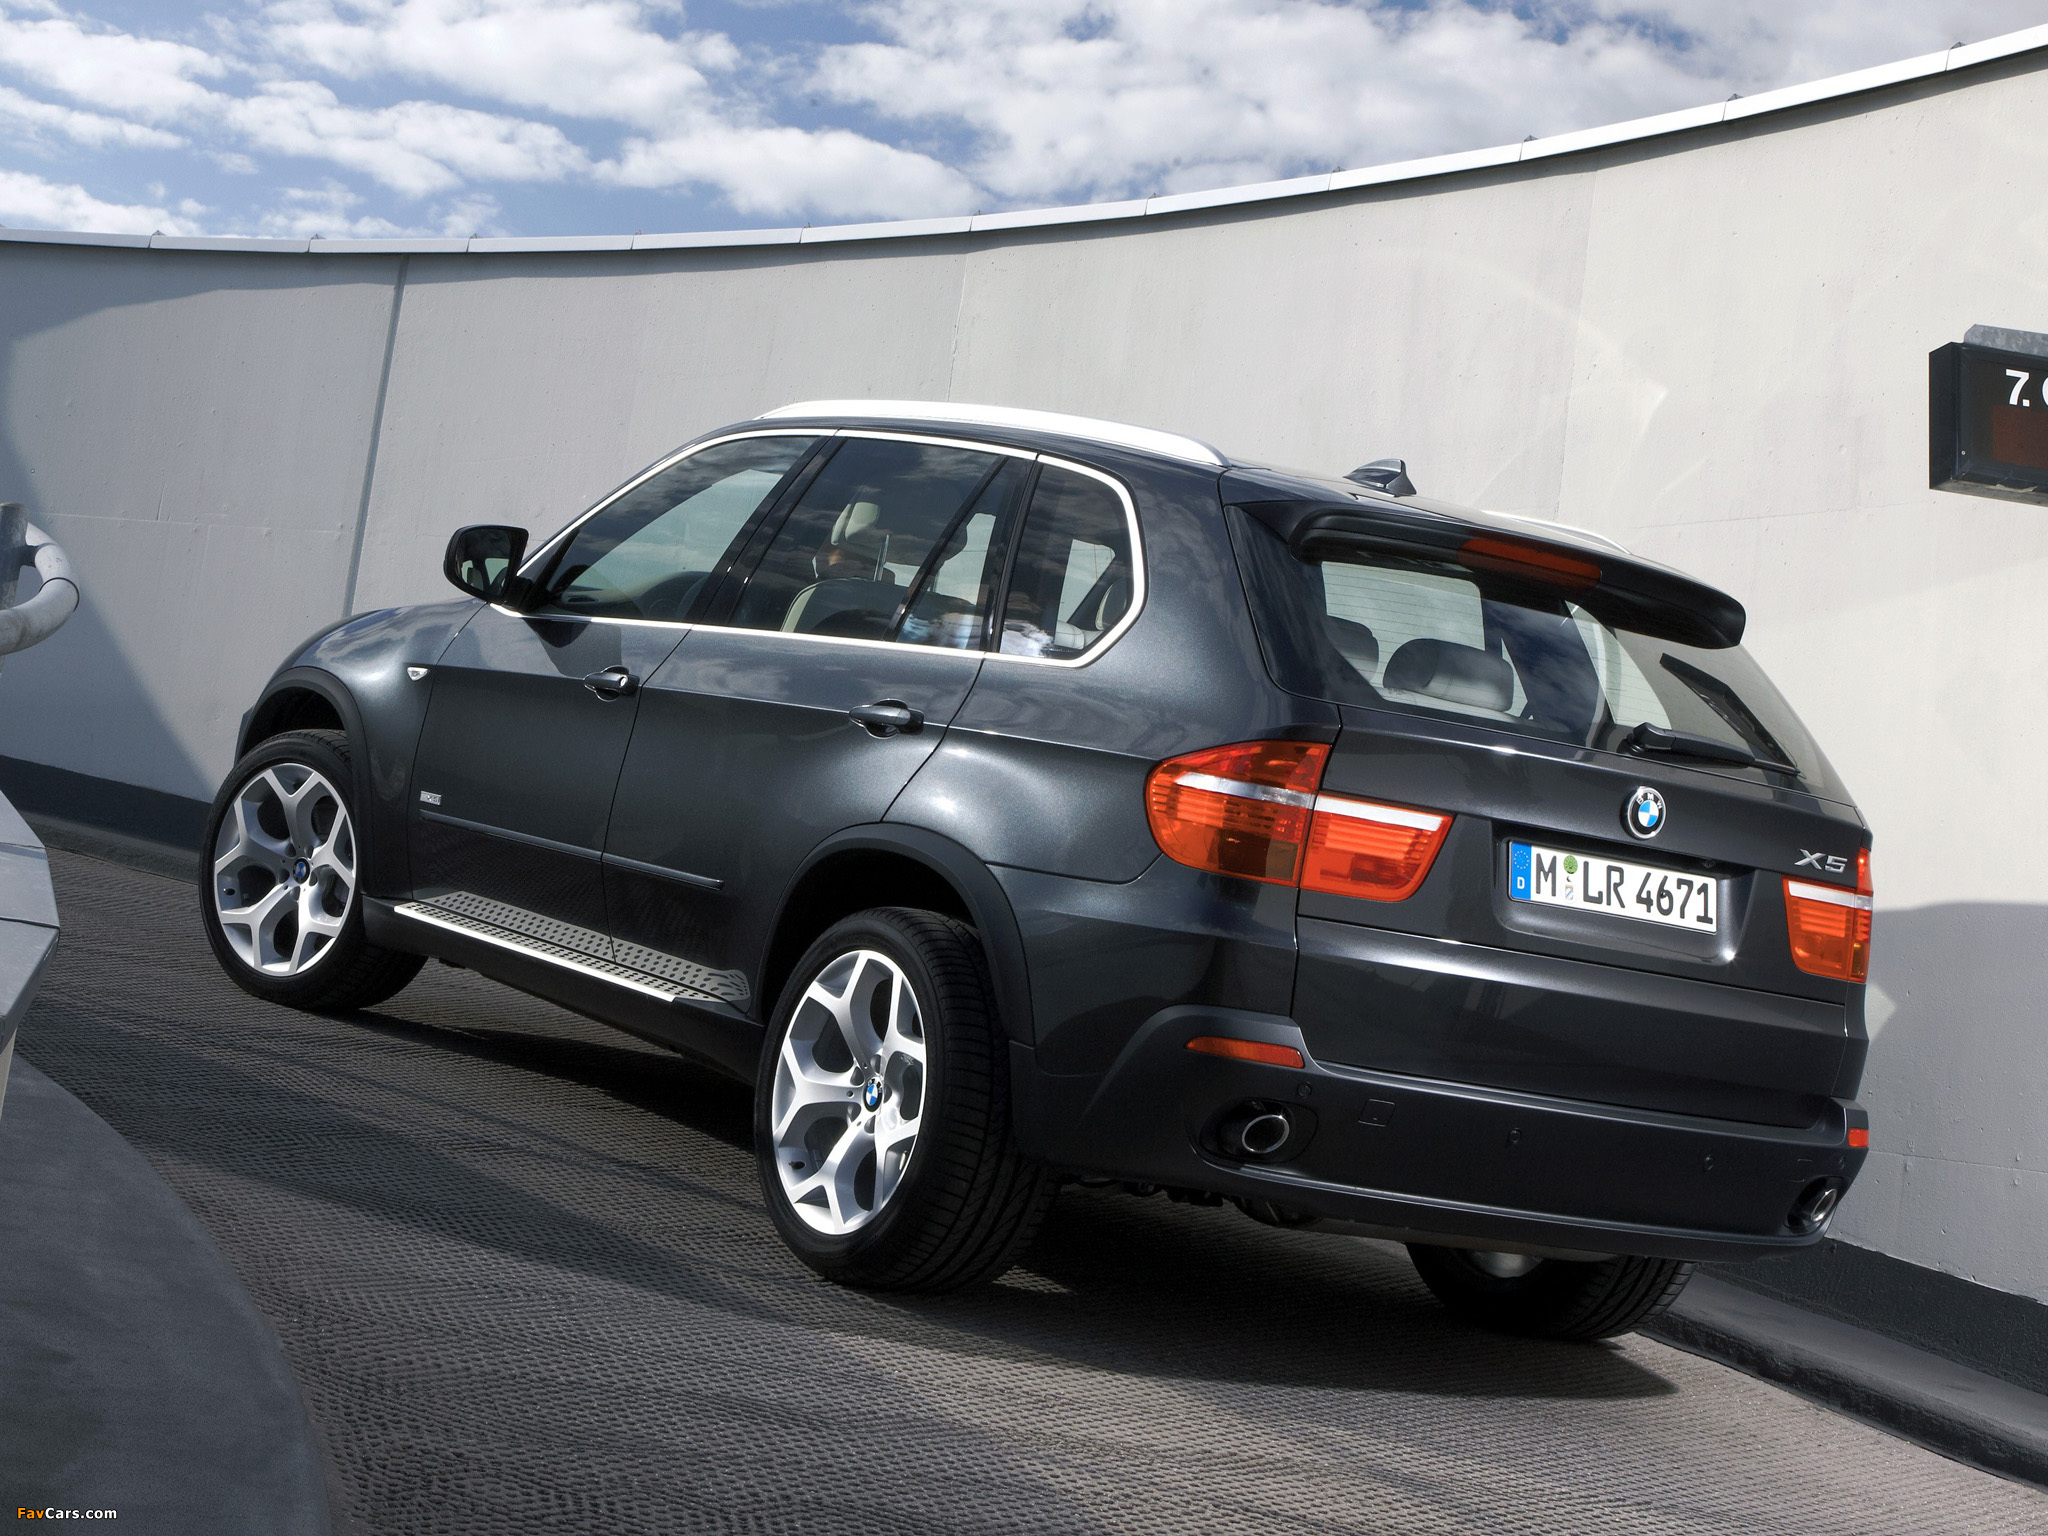 X x 6 x 10 70. BMW x5 xdrive35d 10-year Edition,. BMW x5 2009. BMW x5 e70 10 years Limited Edition. X5 2009 e70.